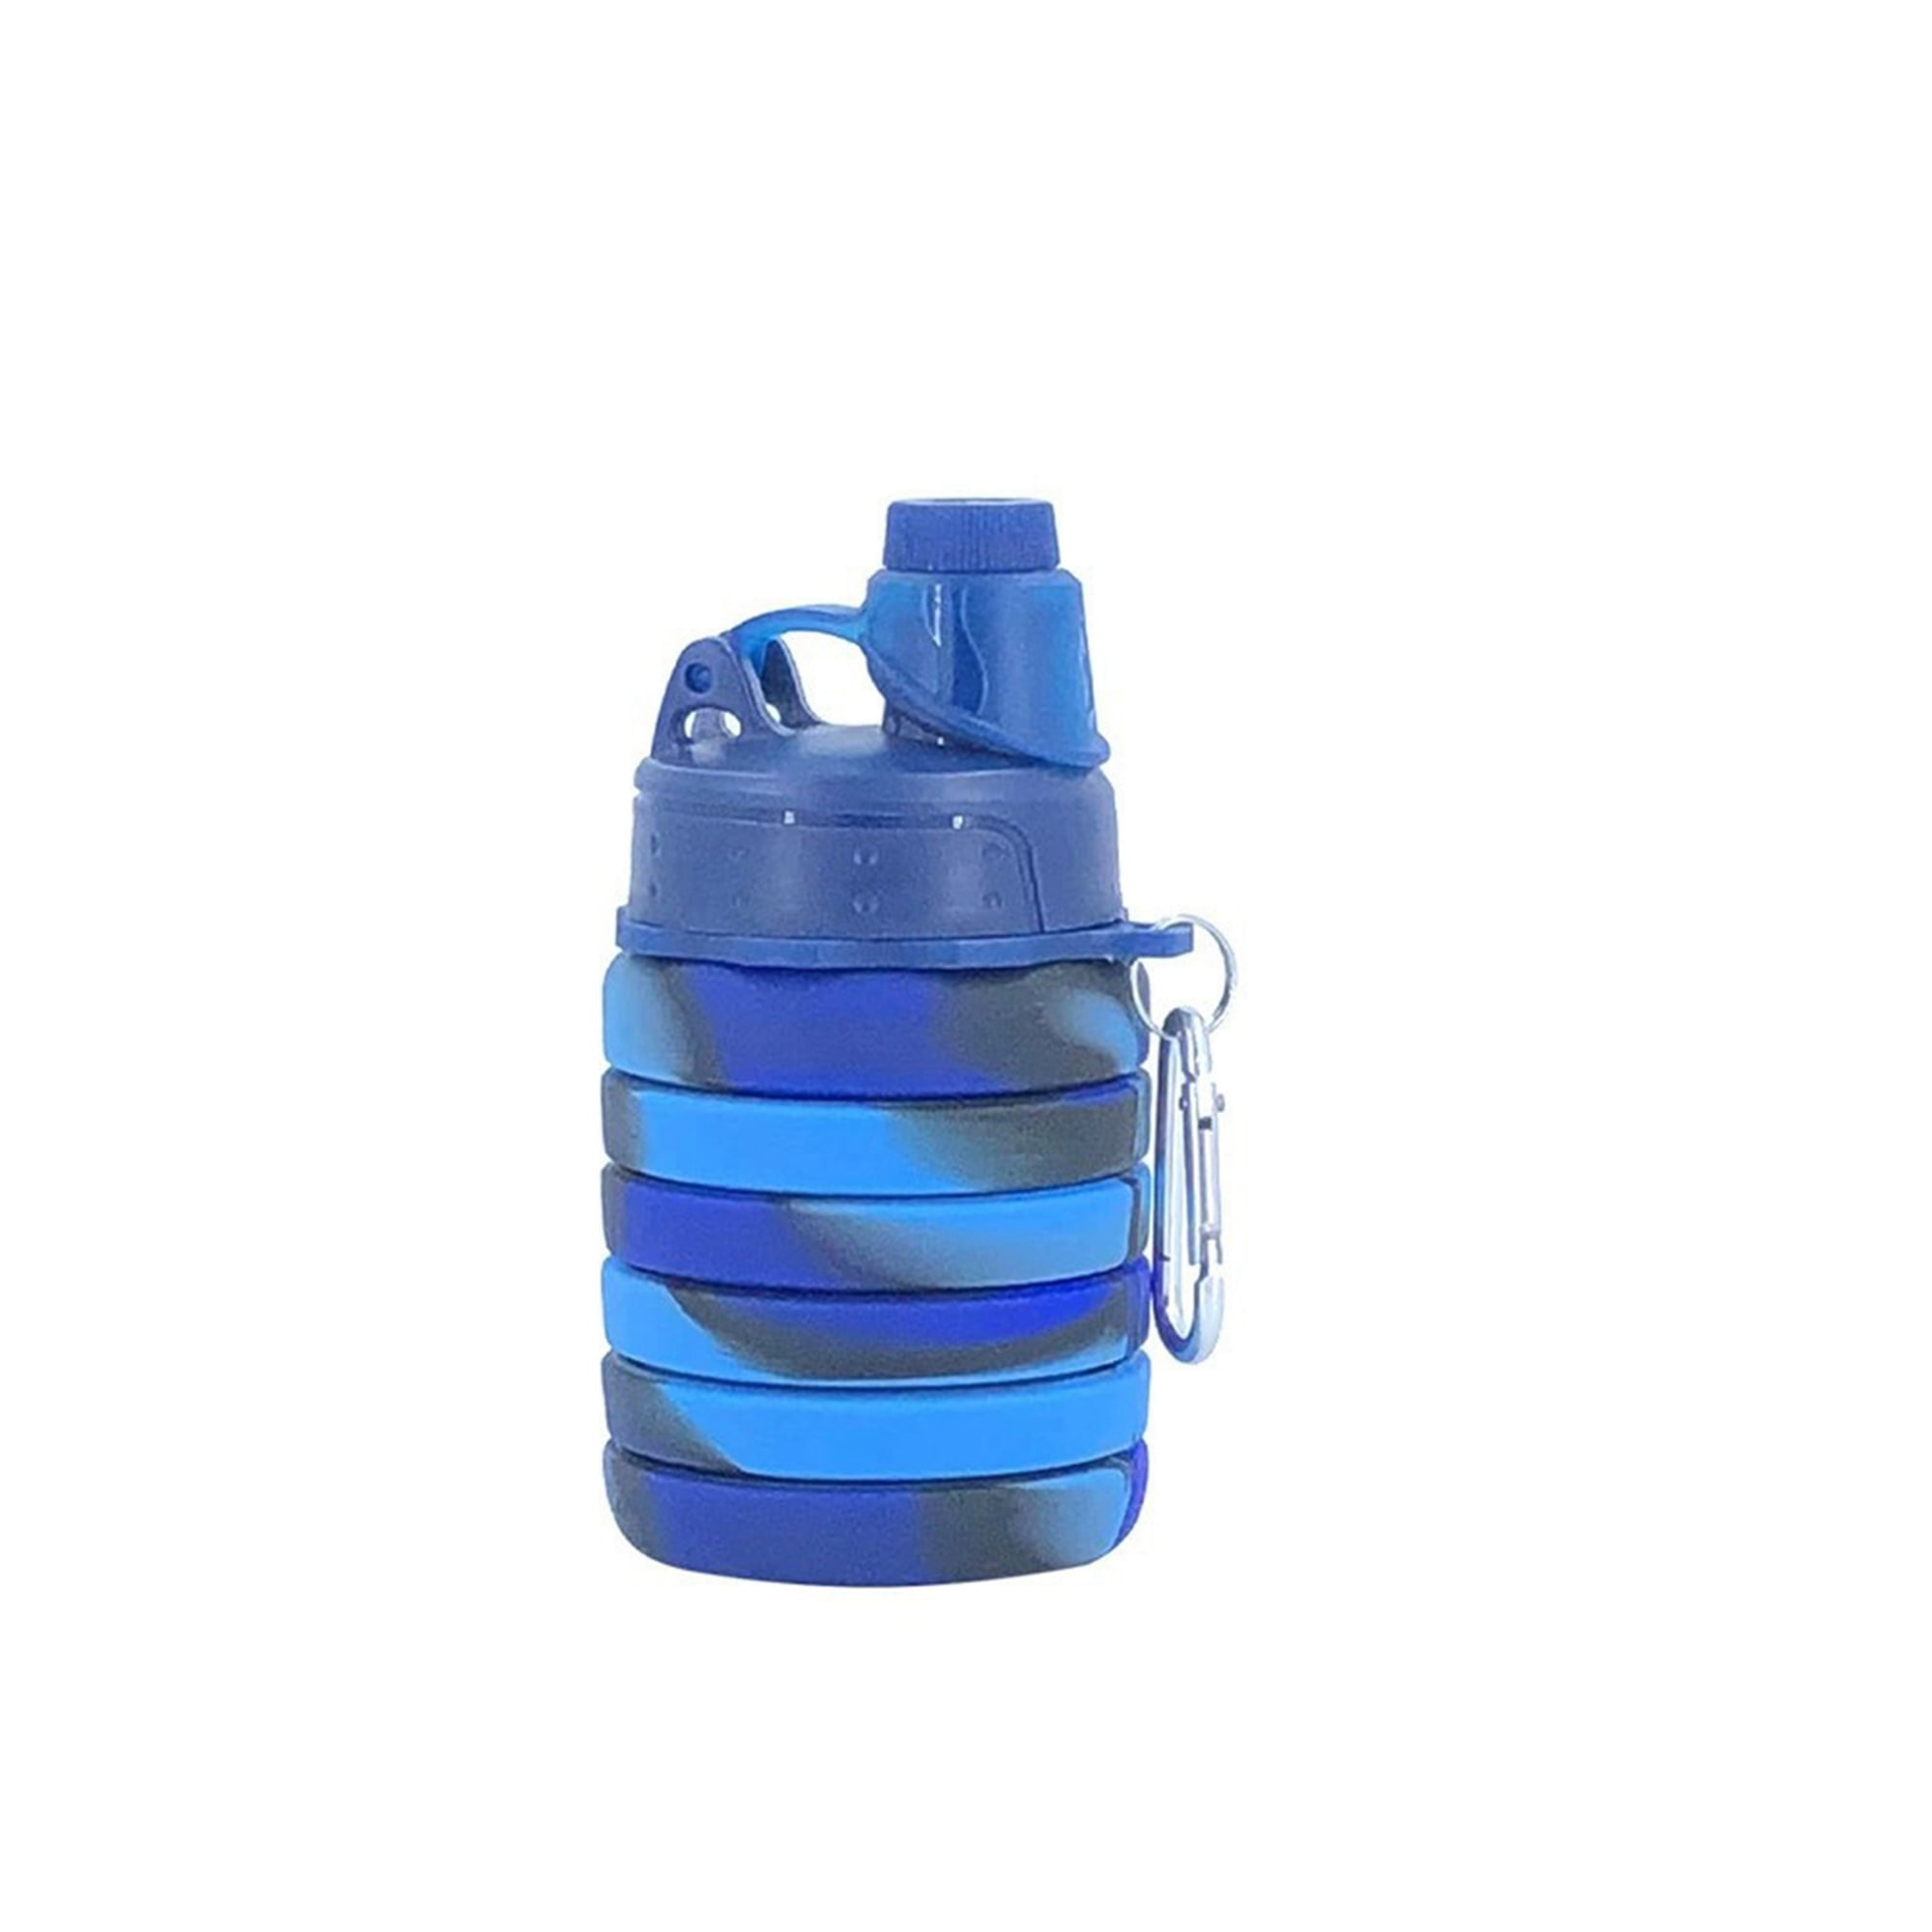 500ml Water Bottle with Strap, Reusable Plastic Bottle Hot-Wheels Design  for School Going Kids 3+ Years, BPA Free Leakproof in Closed Position :  : Sports & Outdoors